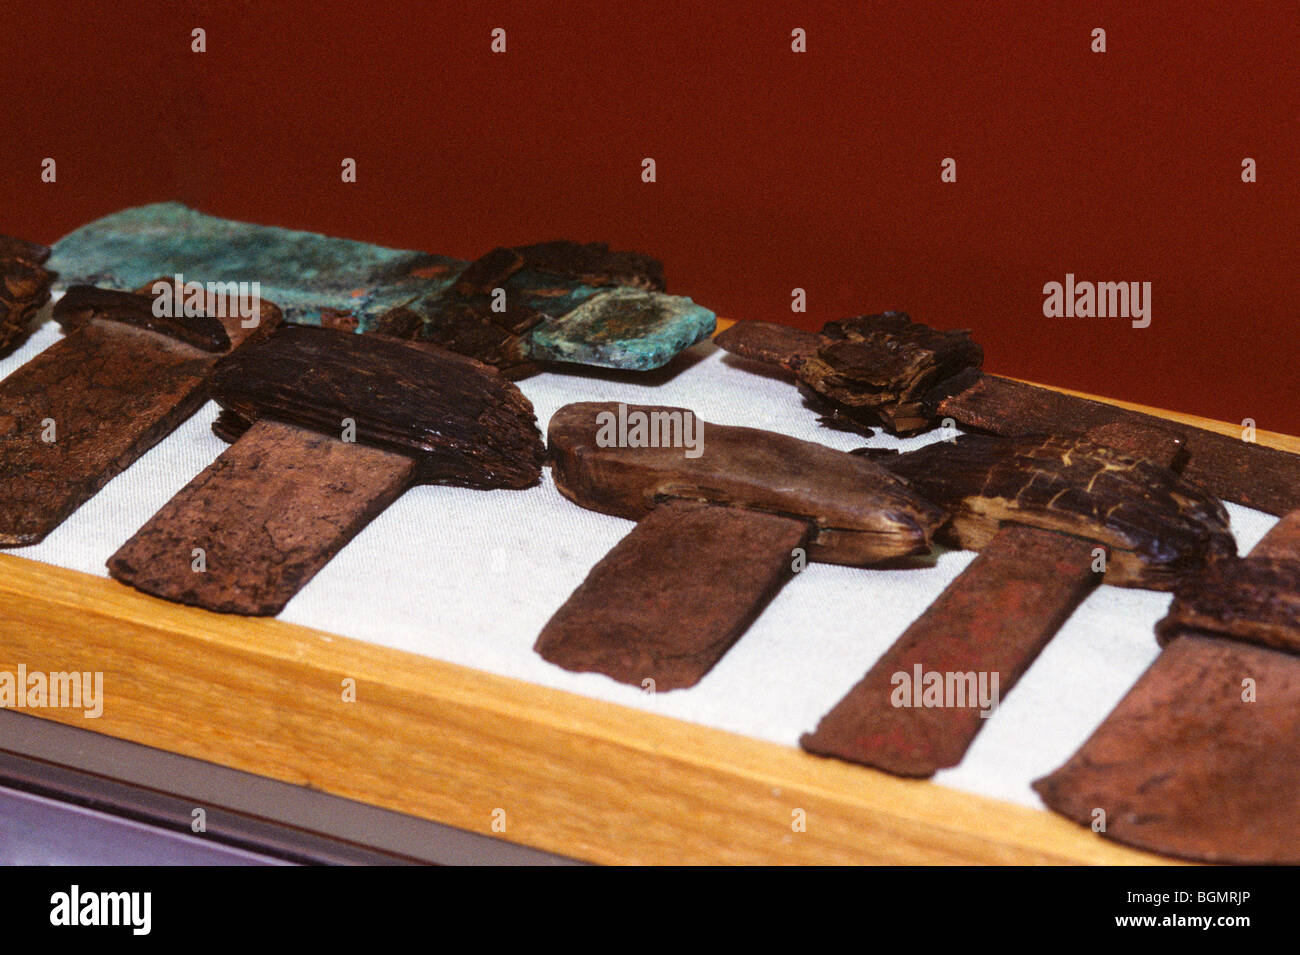 Display of stone tools, axe heads and blades that were used during 1000-1500 A.D. by the Mississippian Culture, Etowah Mounds, Cartersville Georgia Stock Photo